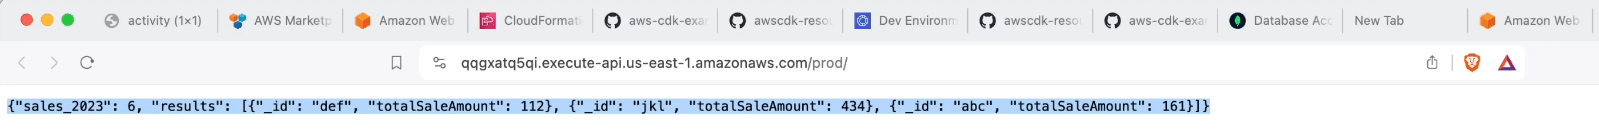 The image shows the output of an AWS Lambda function when accessed via a REST API endpoint from the browser. The output is in JSON format and shows a key named "sales_2023" with a value of 6, indicating there are 6 sales records for the year 2023. Under the "results" key, there are multiple objects each with an "id" and "totalSaleAmount